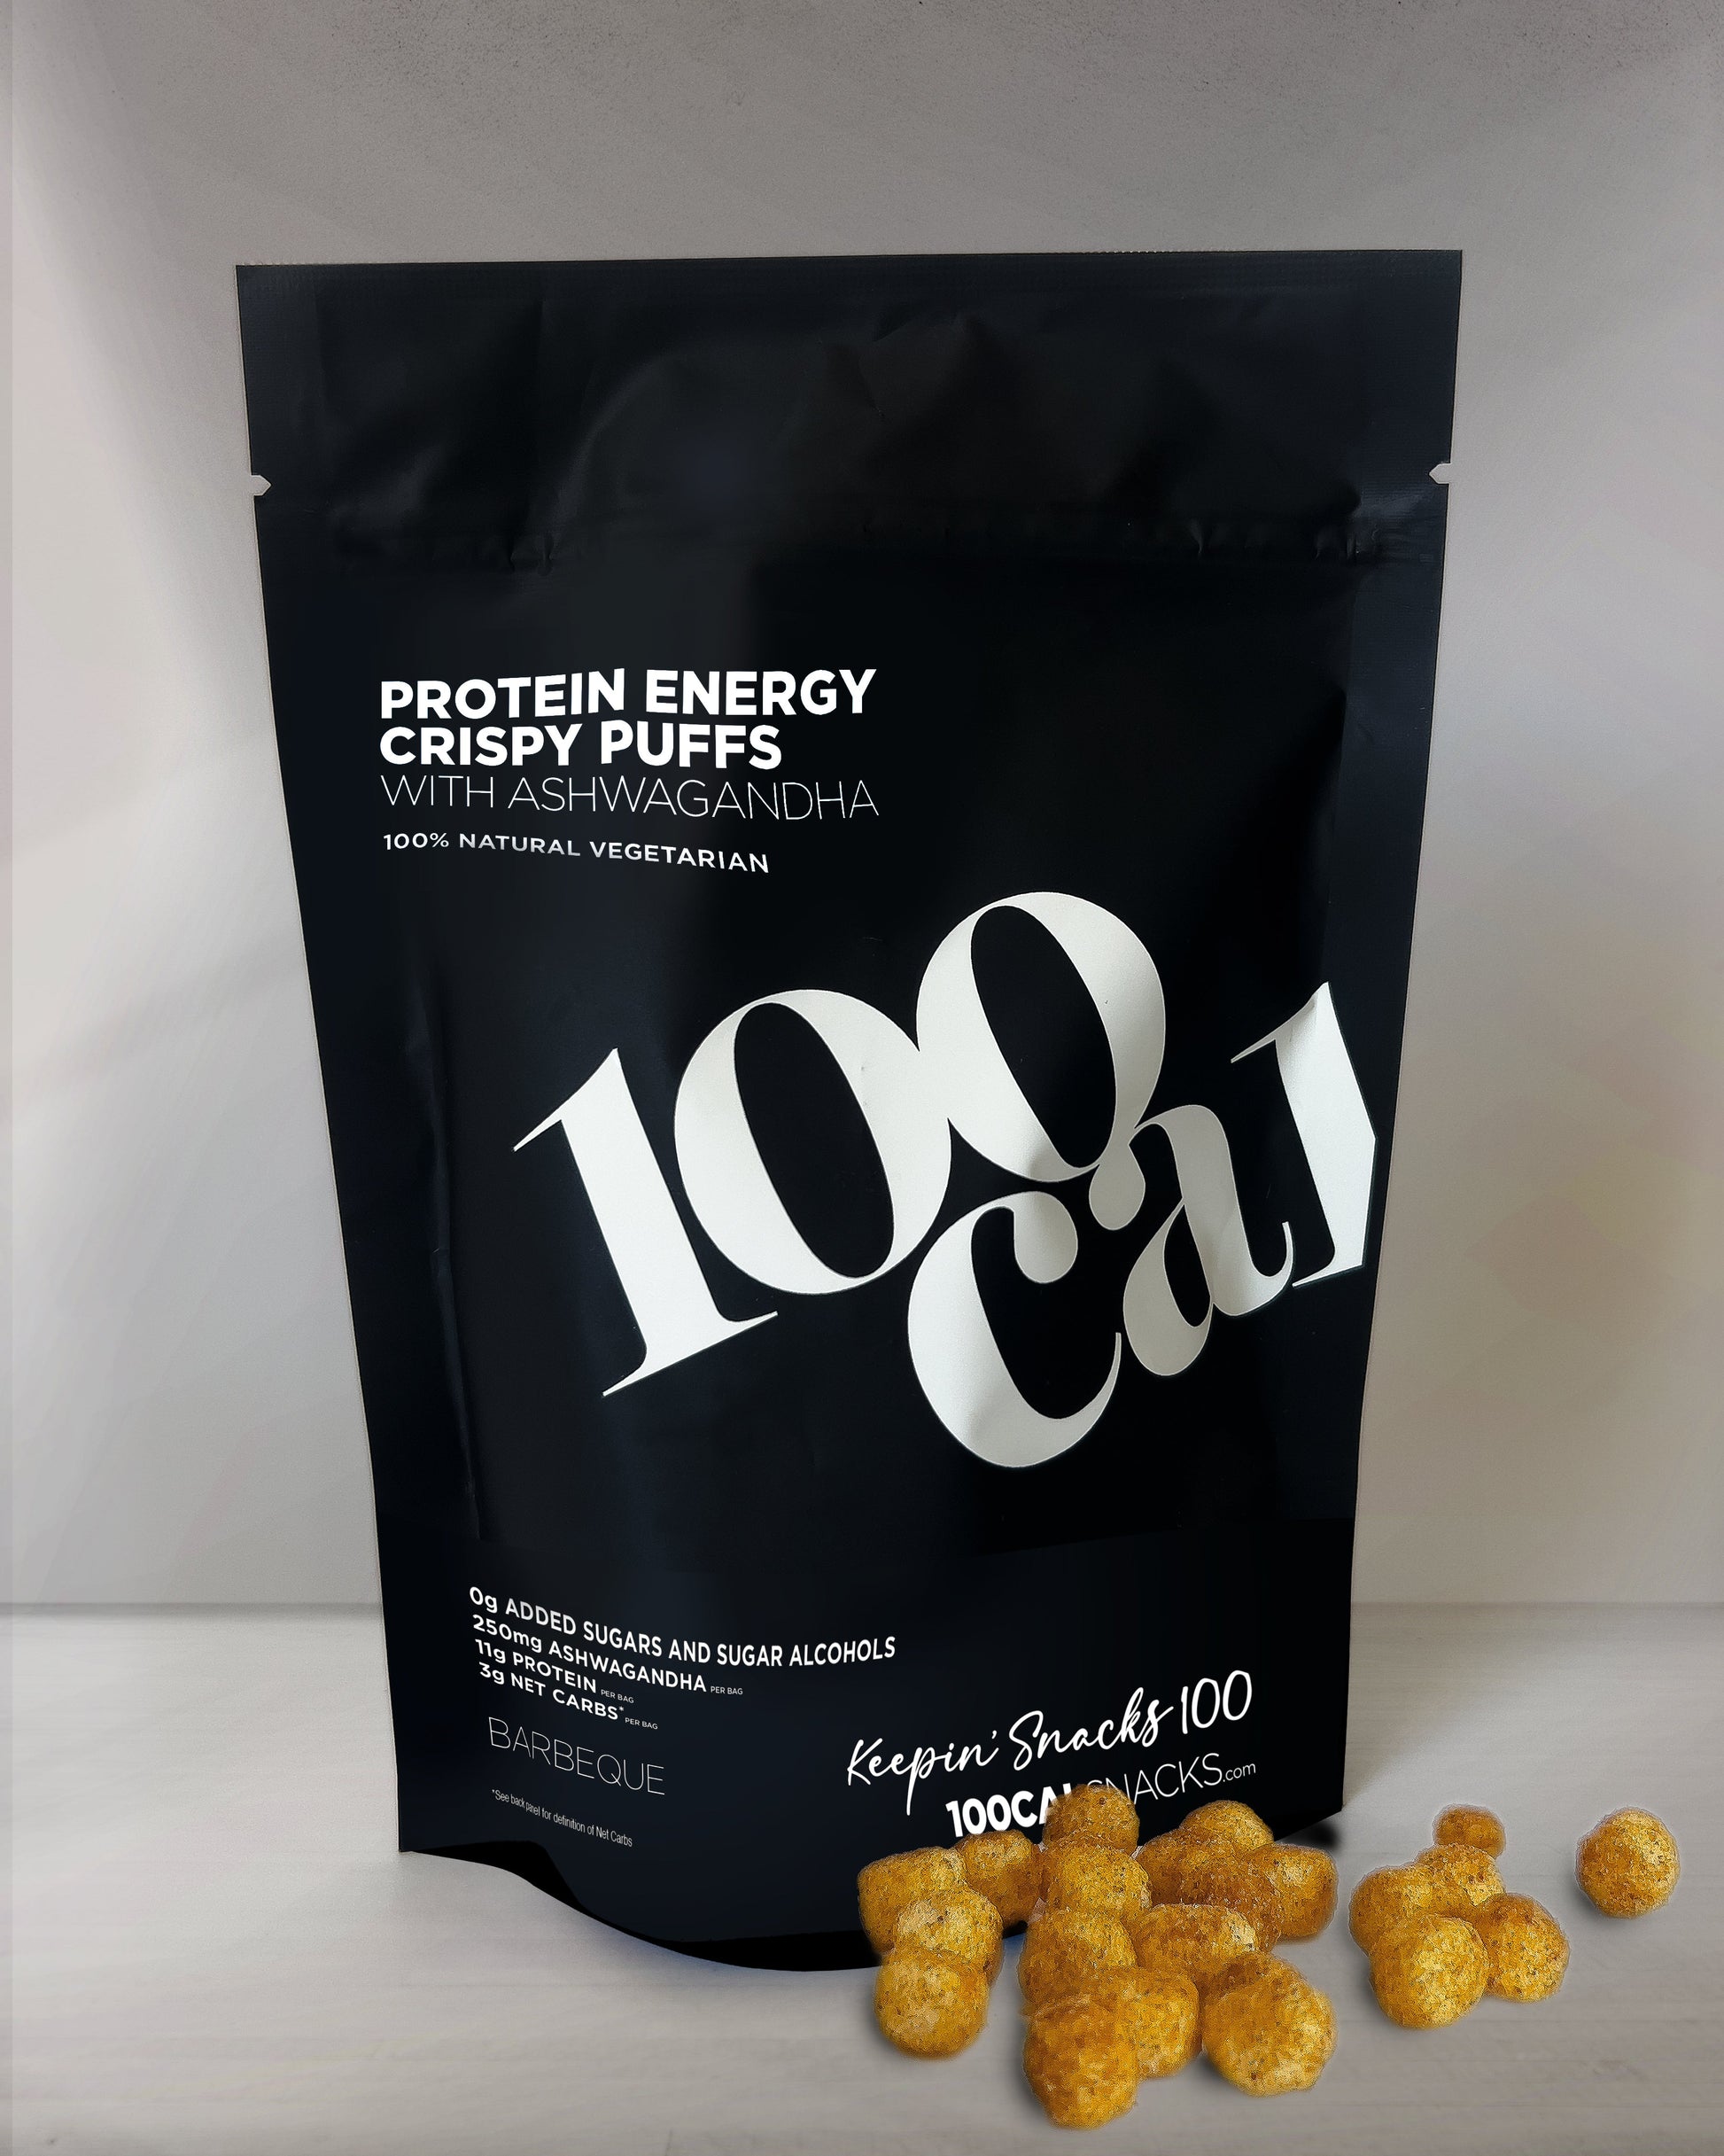 Bag Of Barbeque Protein Puffs High Energy Low Carb Crispy Healthy Snacks